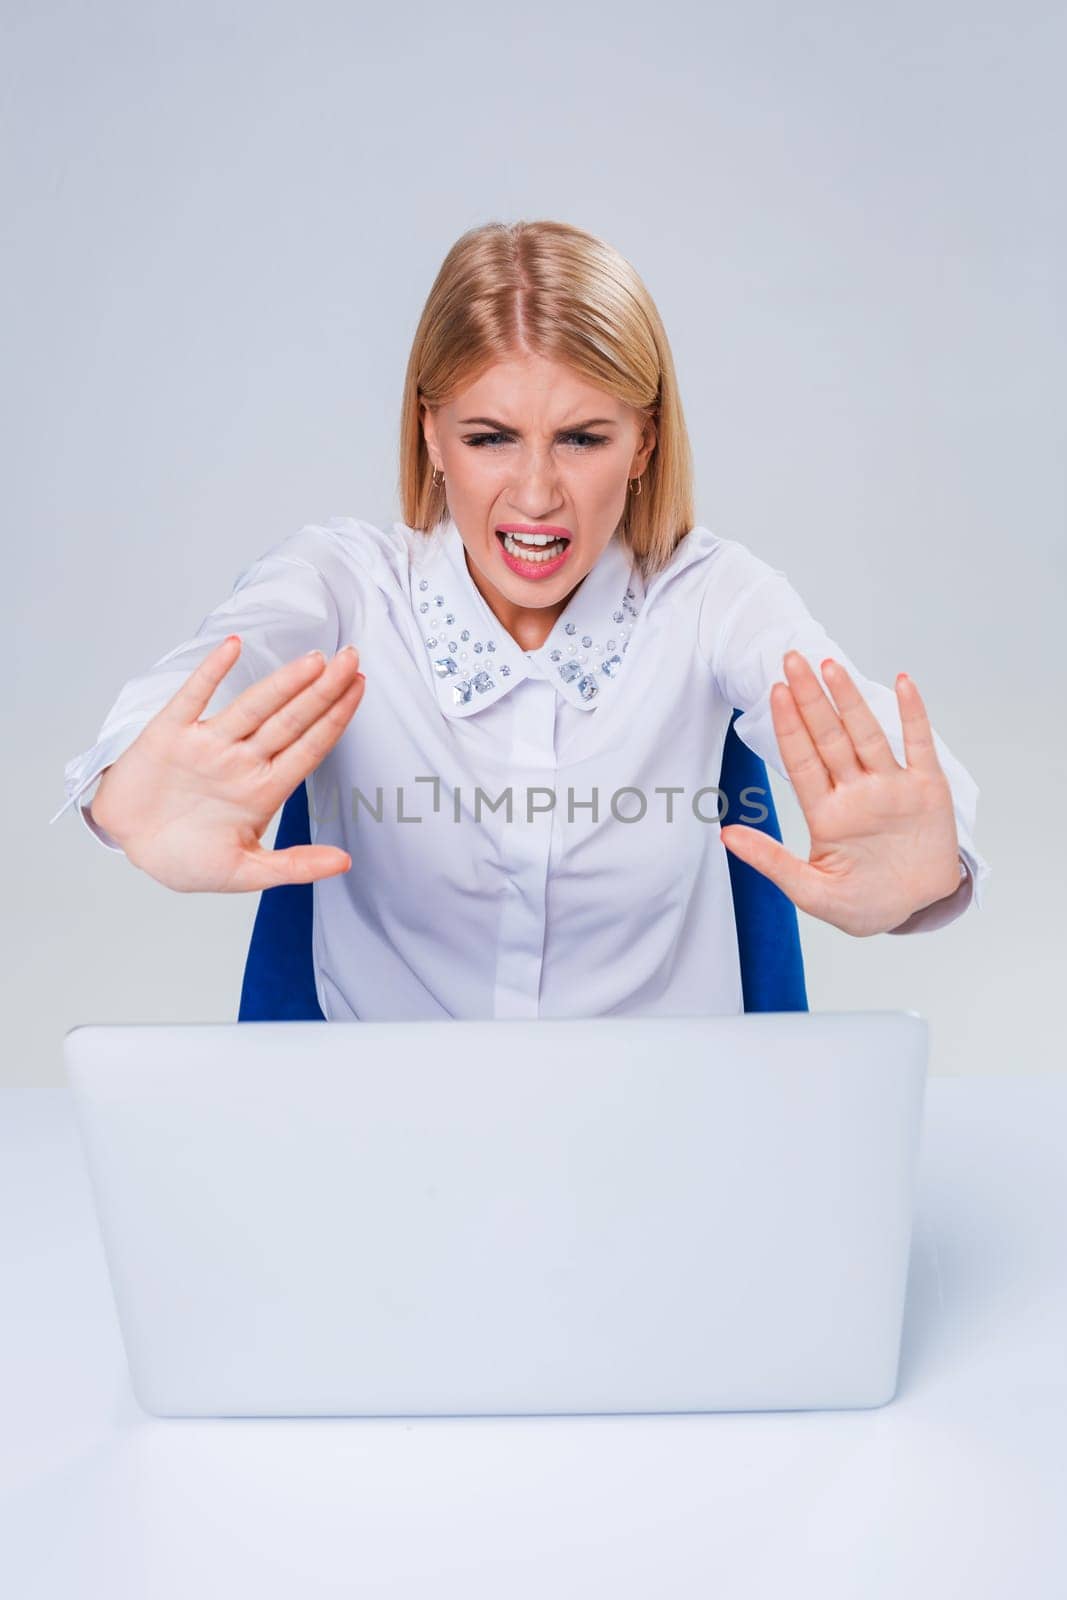 Young businesswoman working at laptop computer. hiding behind the monitor. frustrated, spiteful woman in shock